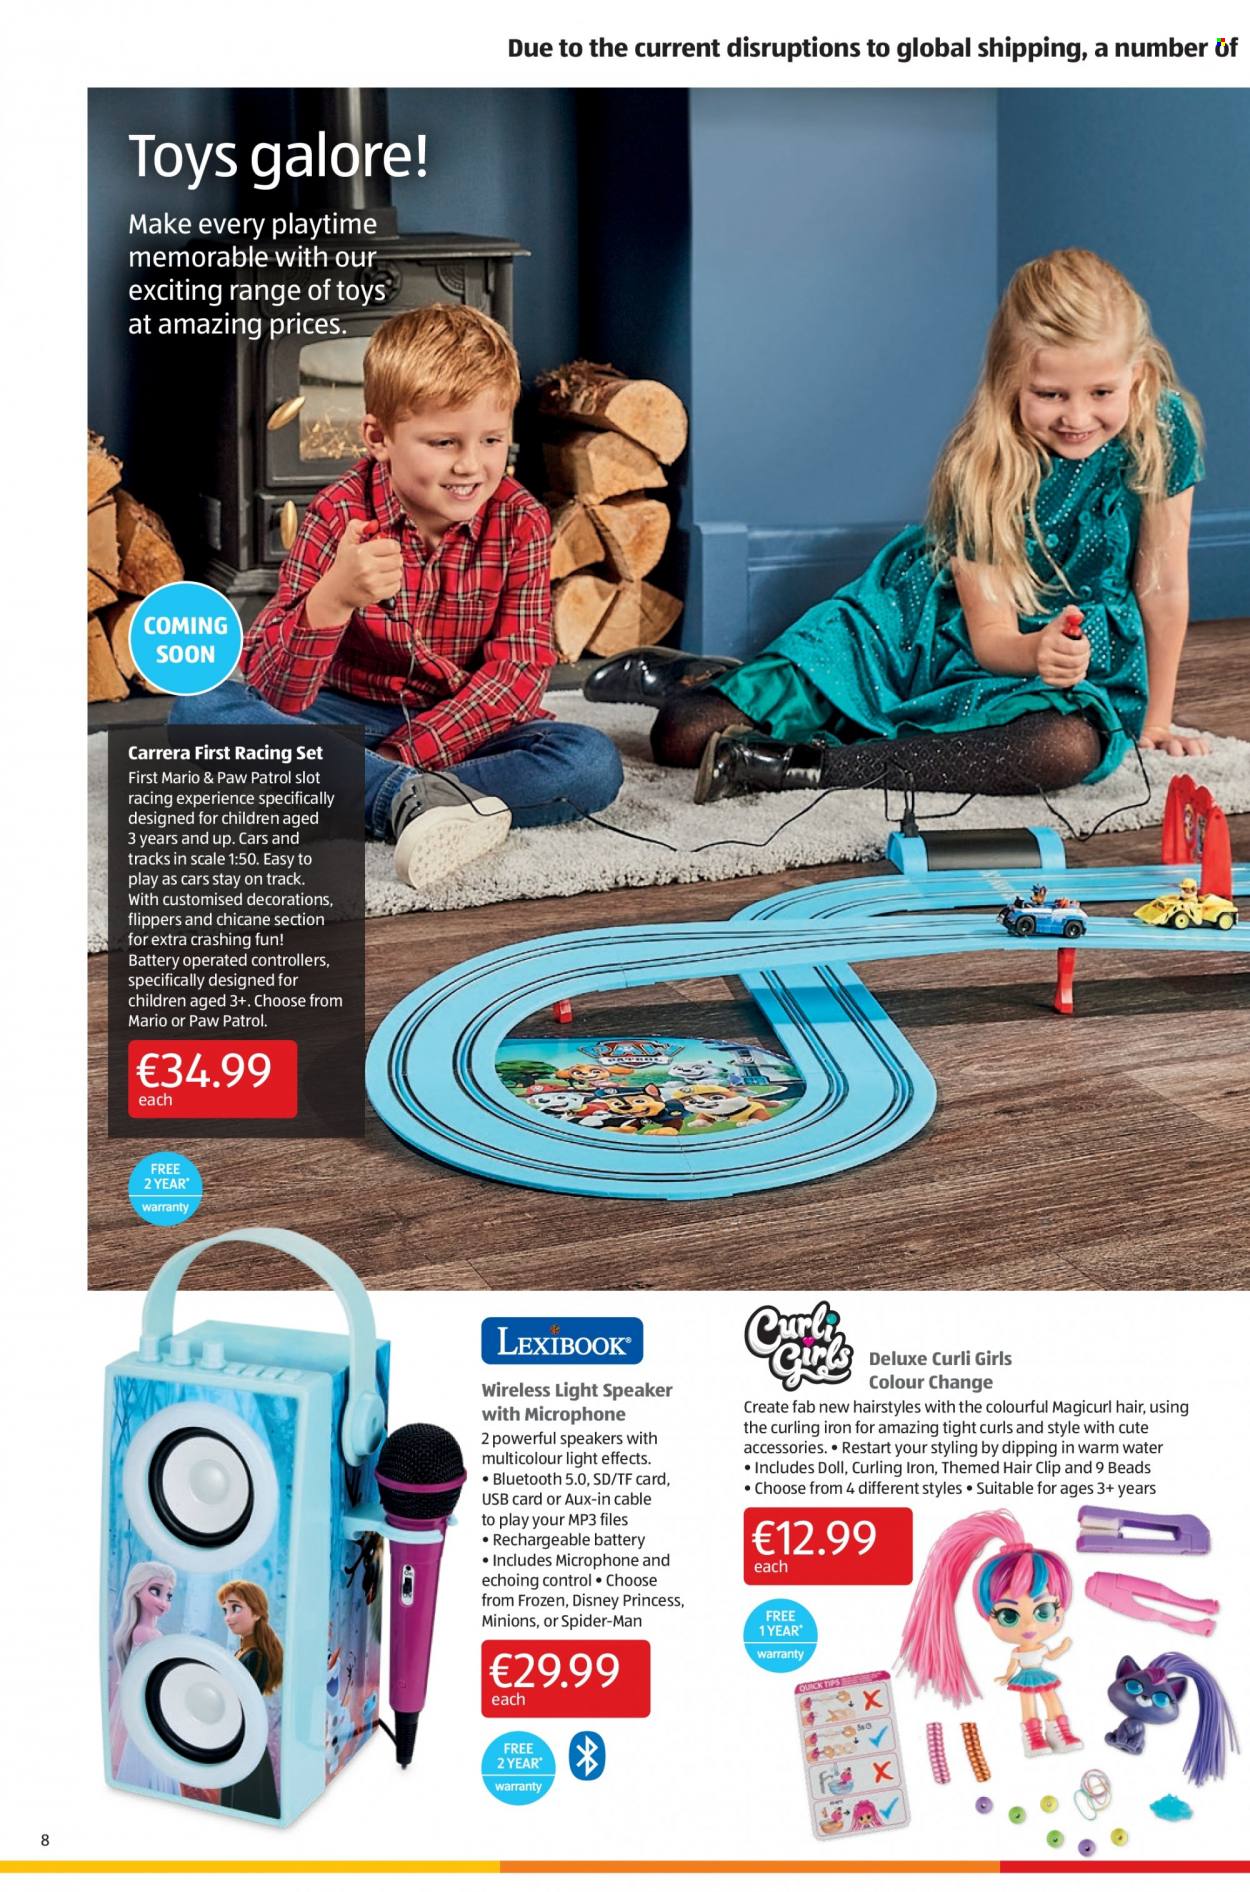 thumbnail - Aldi offer  - 20.01.2022 - 26.01.2022 - Sales products - scale, Disney, Paw Patrol, Fab, Minions, rechargeable battery, hair clipper, curling iron, Carrera, doll, toys, princess. Page 8.